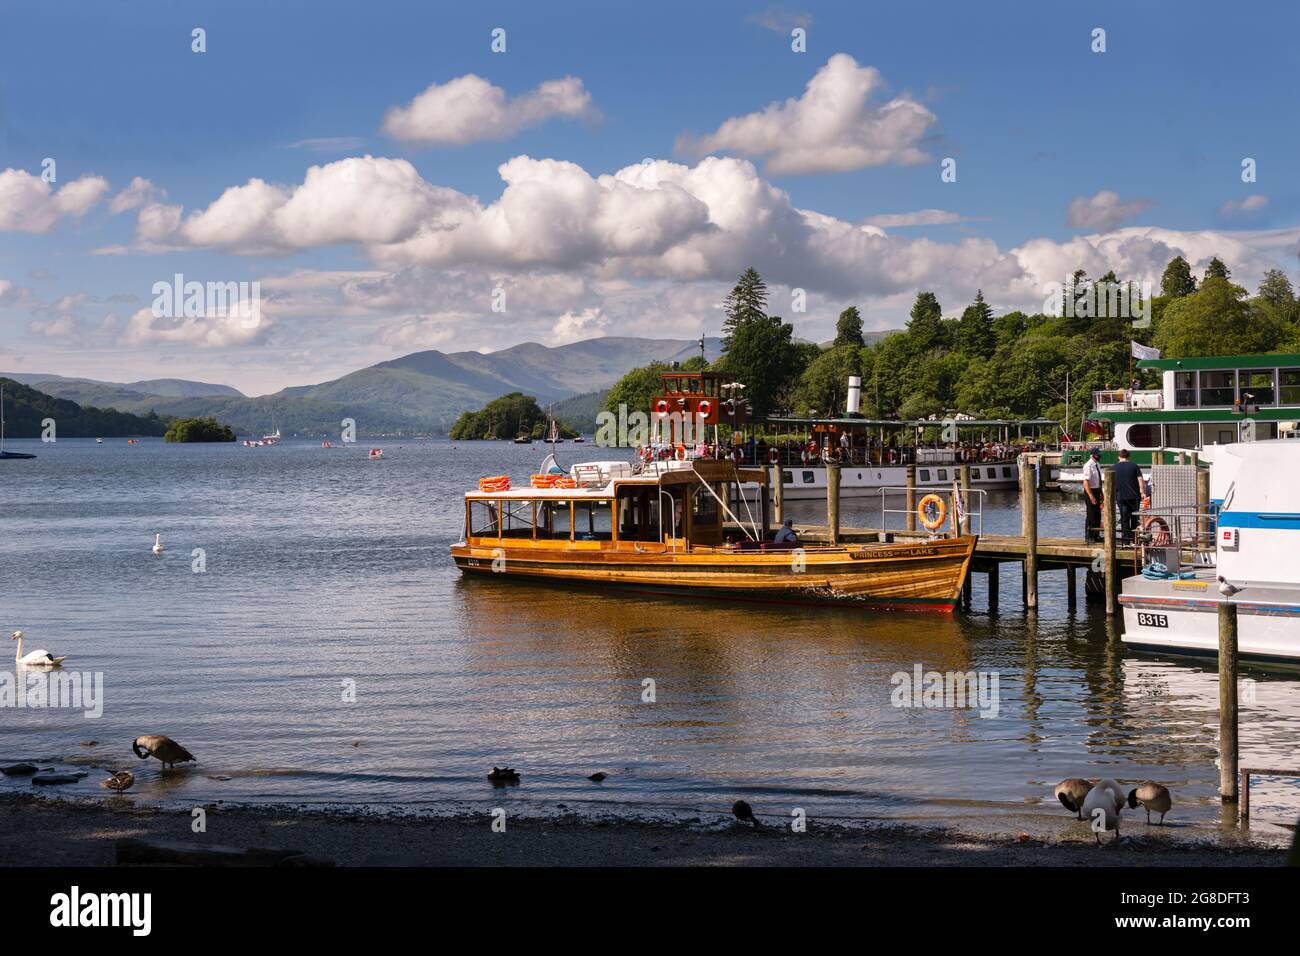 WINDERMERE, ENGLAND - JULY 5th, 2021: wooden boat on windermere on a beautiful summer afternoon, Lake district, England Stock Photo